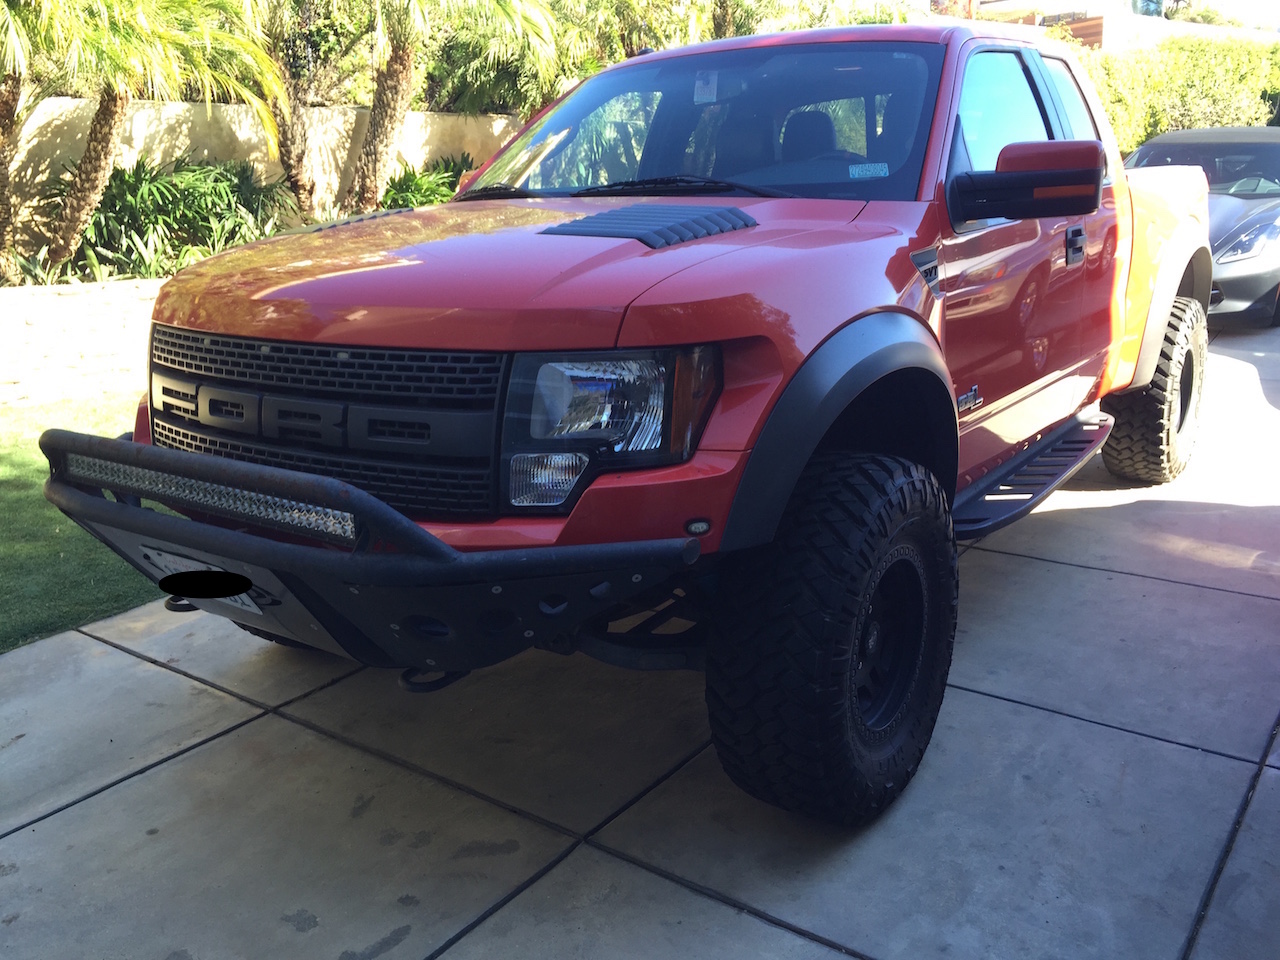 2010 Ford raptor 0 to 60 #4